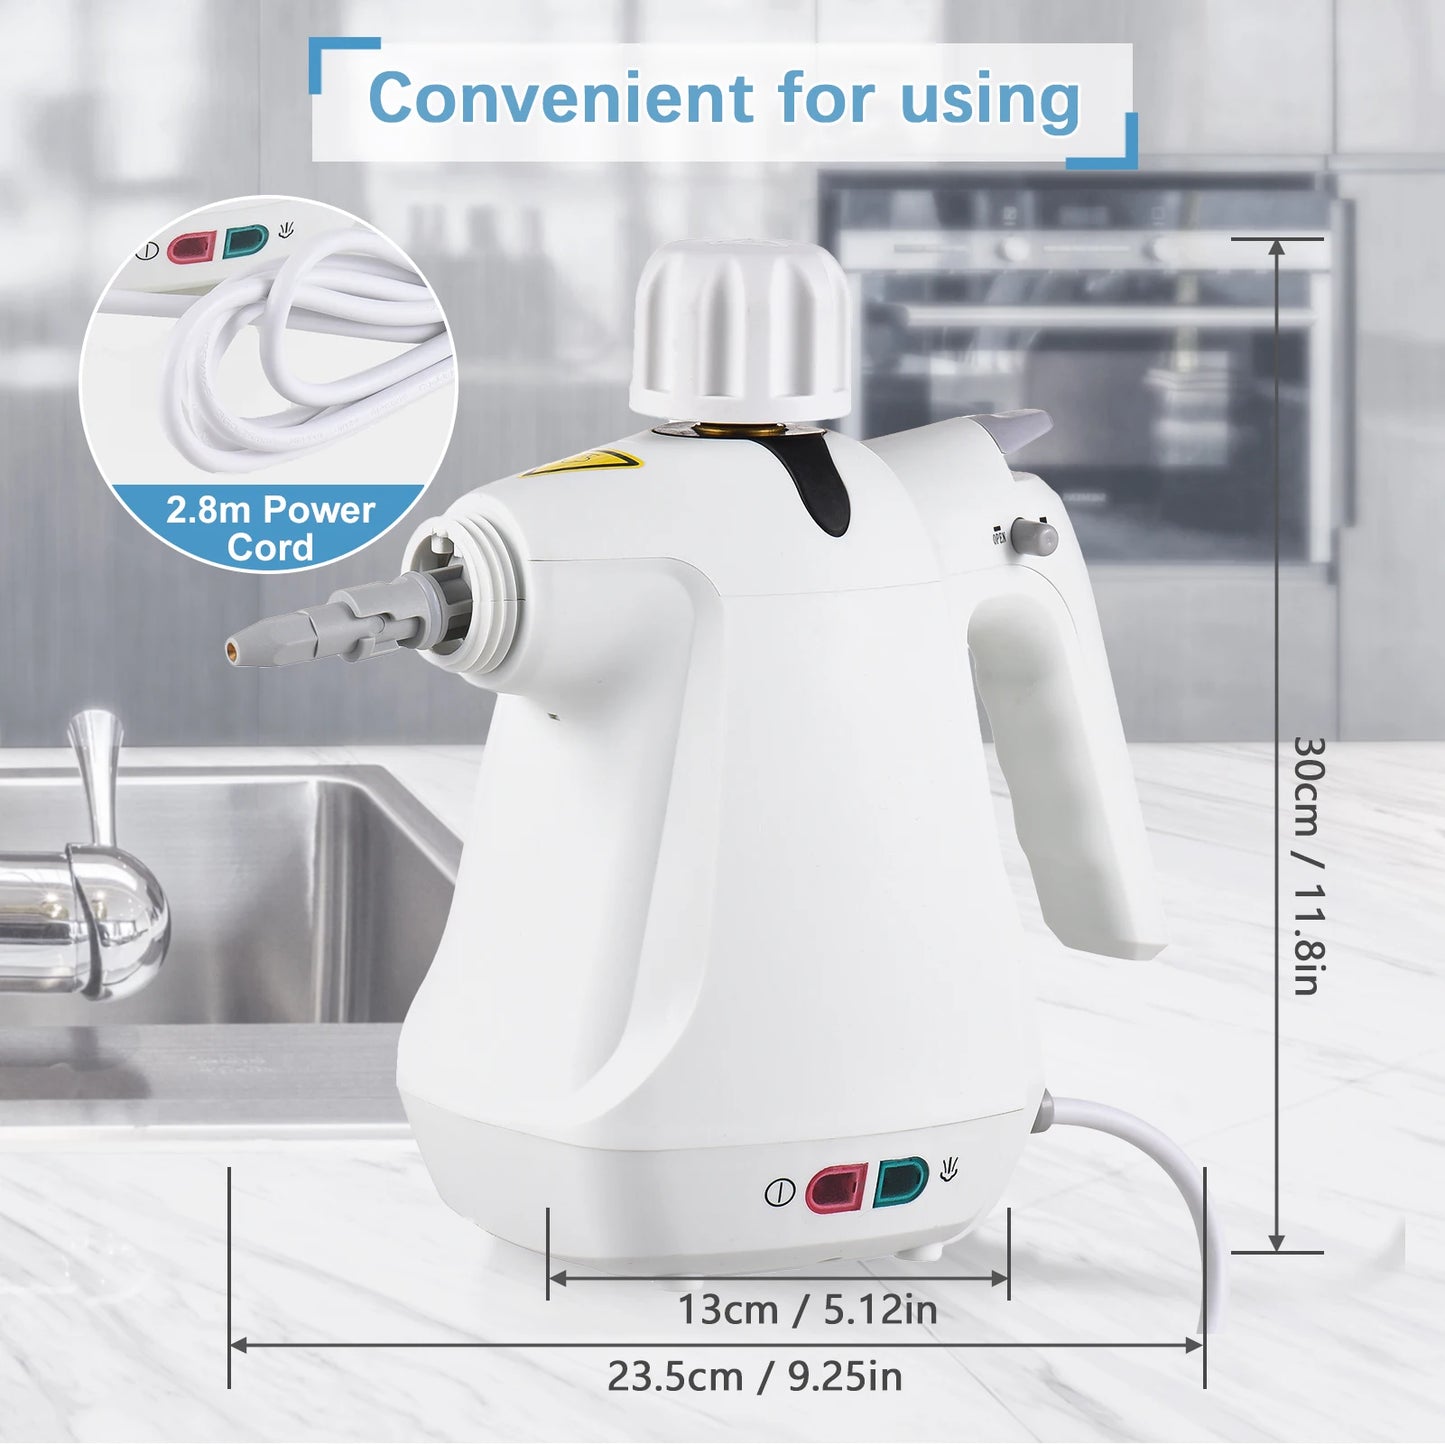 High-Powered 1000W Home Appliance Steam Cleaner | Deep Cleaning Machine